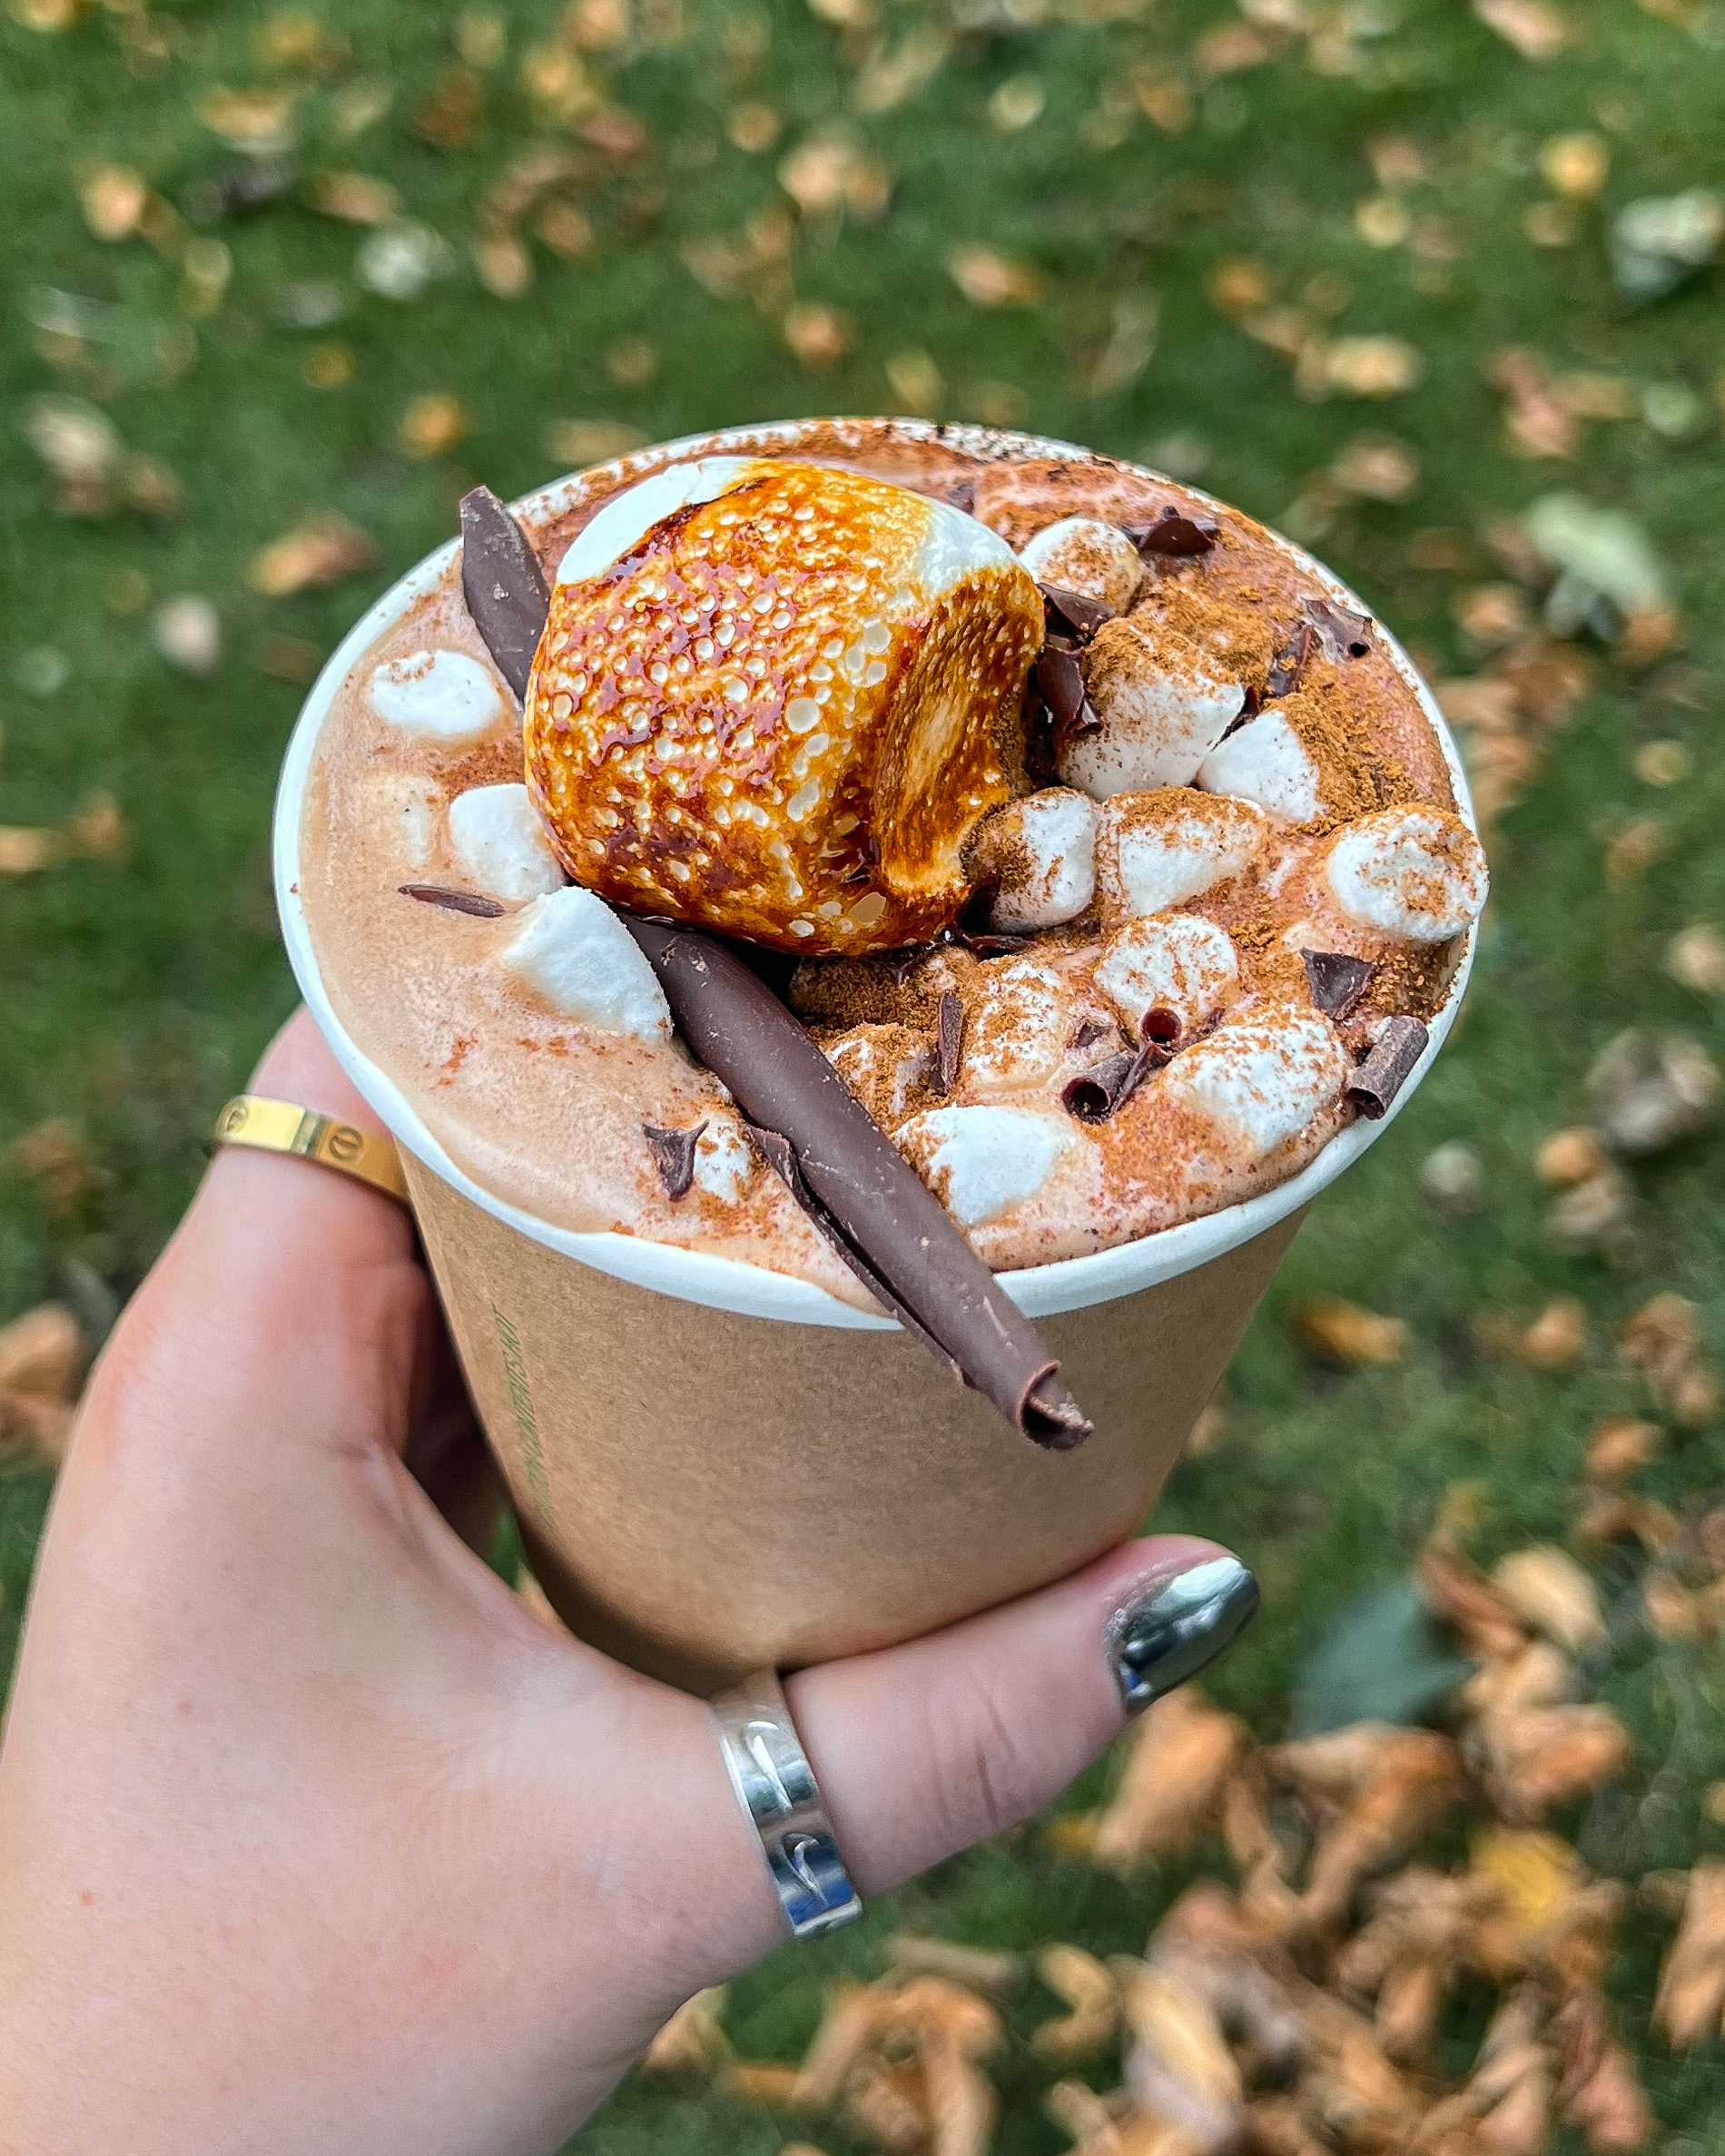 Hot chocolate topped with a handful of small marshmallows, a larger toasted marshmallow, as well as a chocolate garnish and a dusting of cinnamon